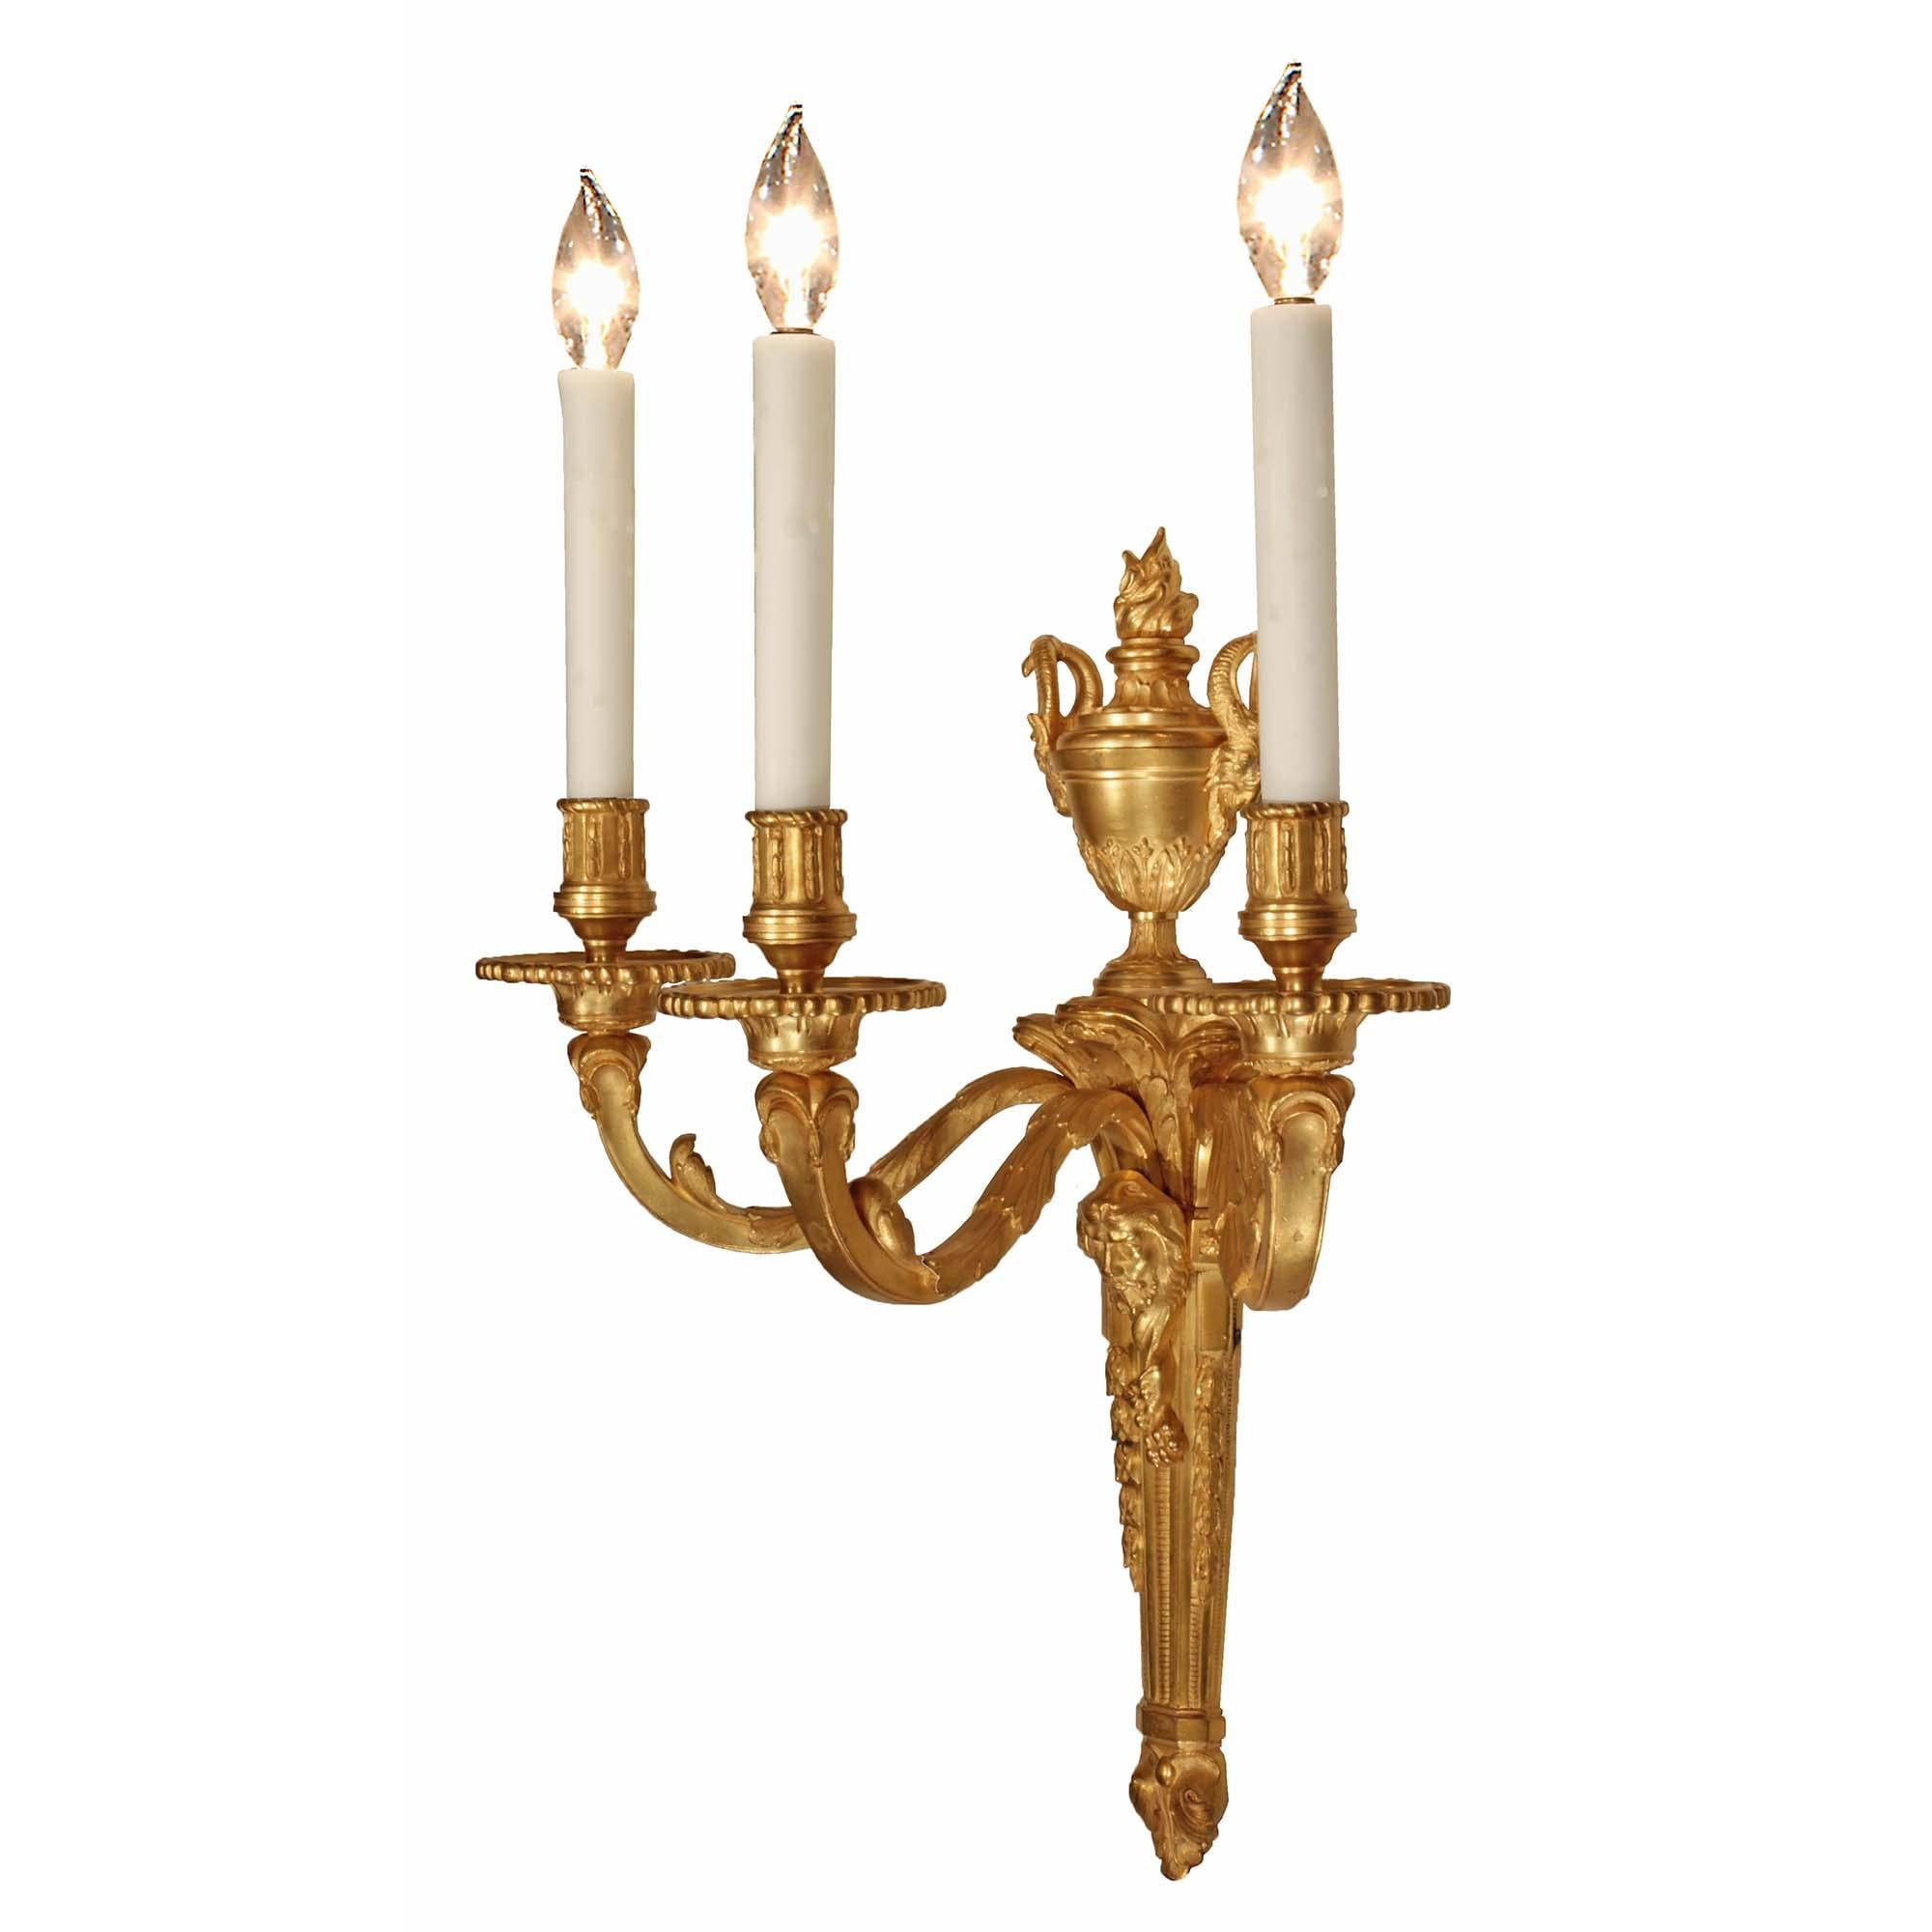 An elegant pair of French 19th century Louis XVI st. ormolu three-arm sconces. Each sconce is centered by a fine bottom acorn finial below the lovely tapering fut with the floral and reeded pattern. At the center is a richly chased Hercules wearing